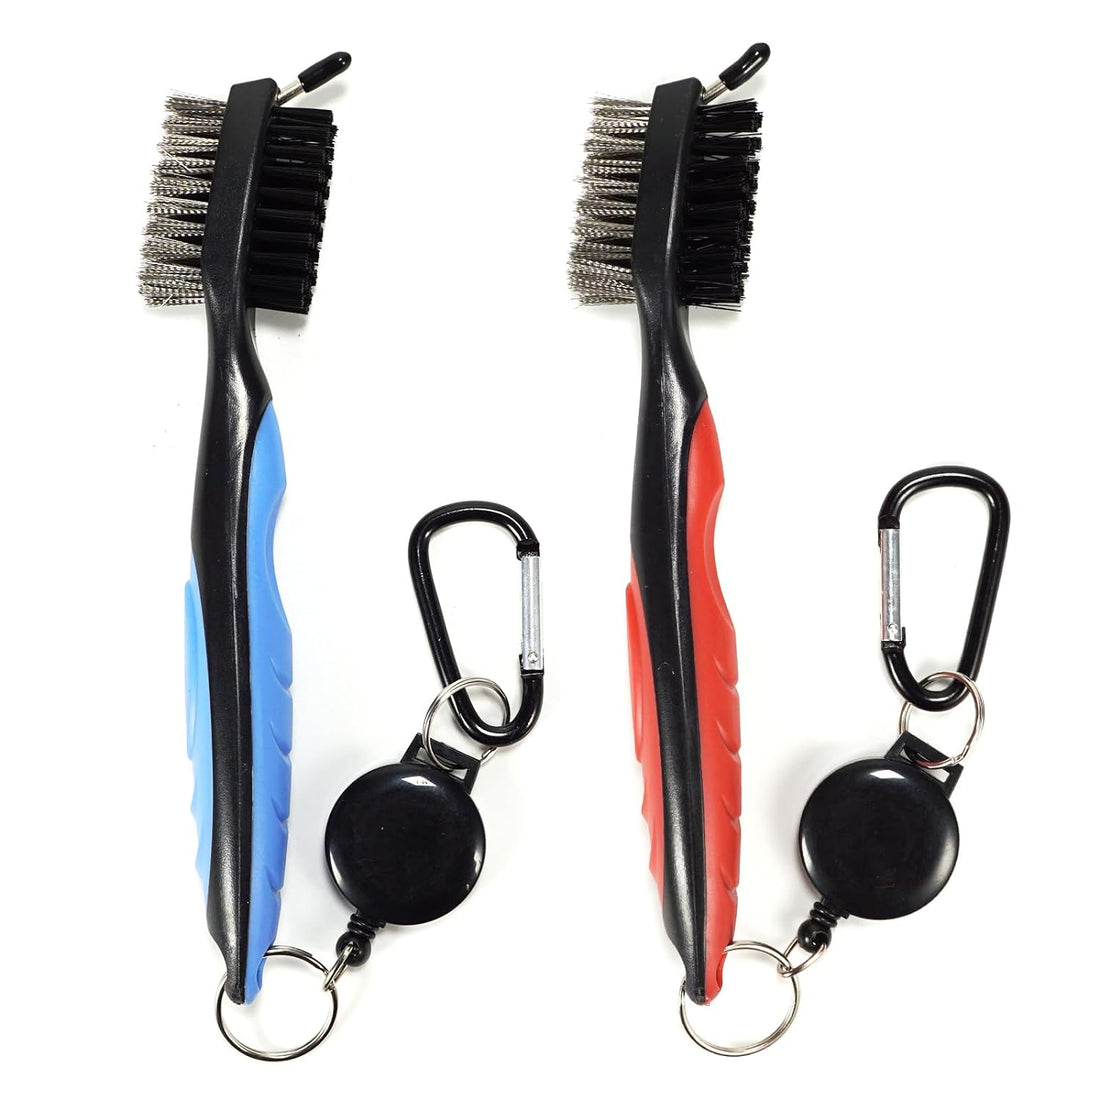 Walkpet Pack of 2 Golf Club Brush Groove Cleaner with 2 Ft Retractable Zip-line and Aluminum Carabiner Lightweight and Stylish, Must-Have Golf Tool for Cleaning Dirty Clubs Groove (Red + Blue)…